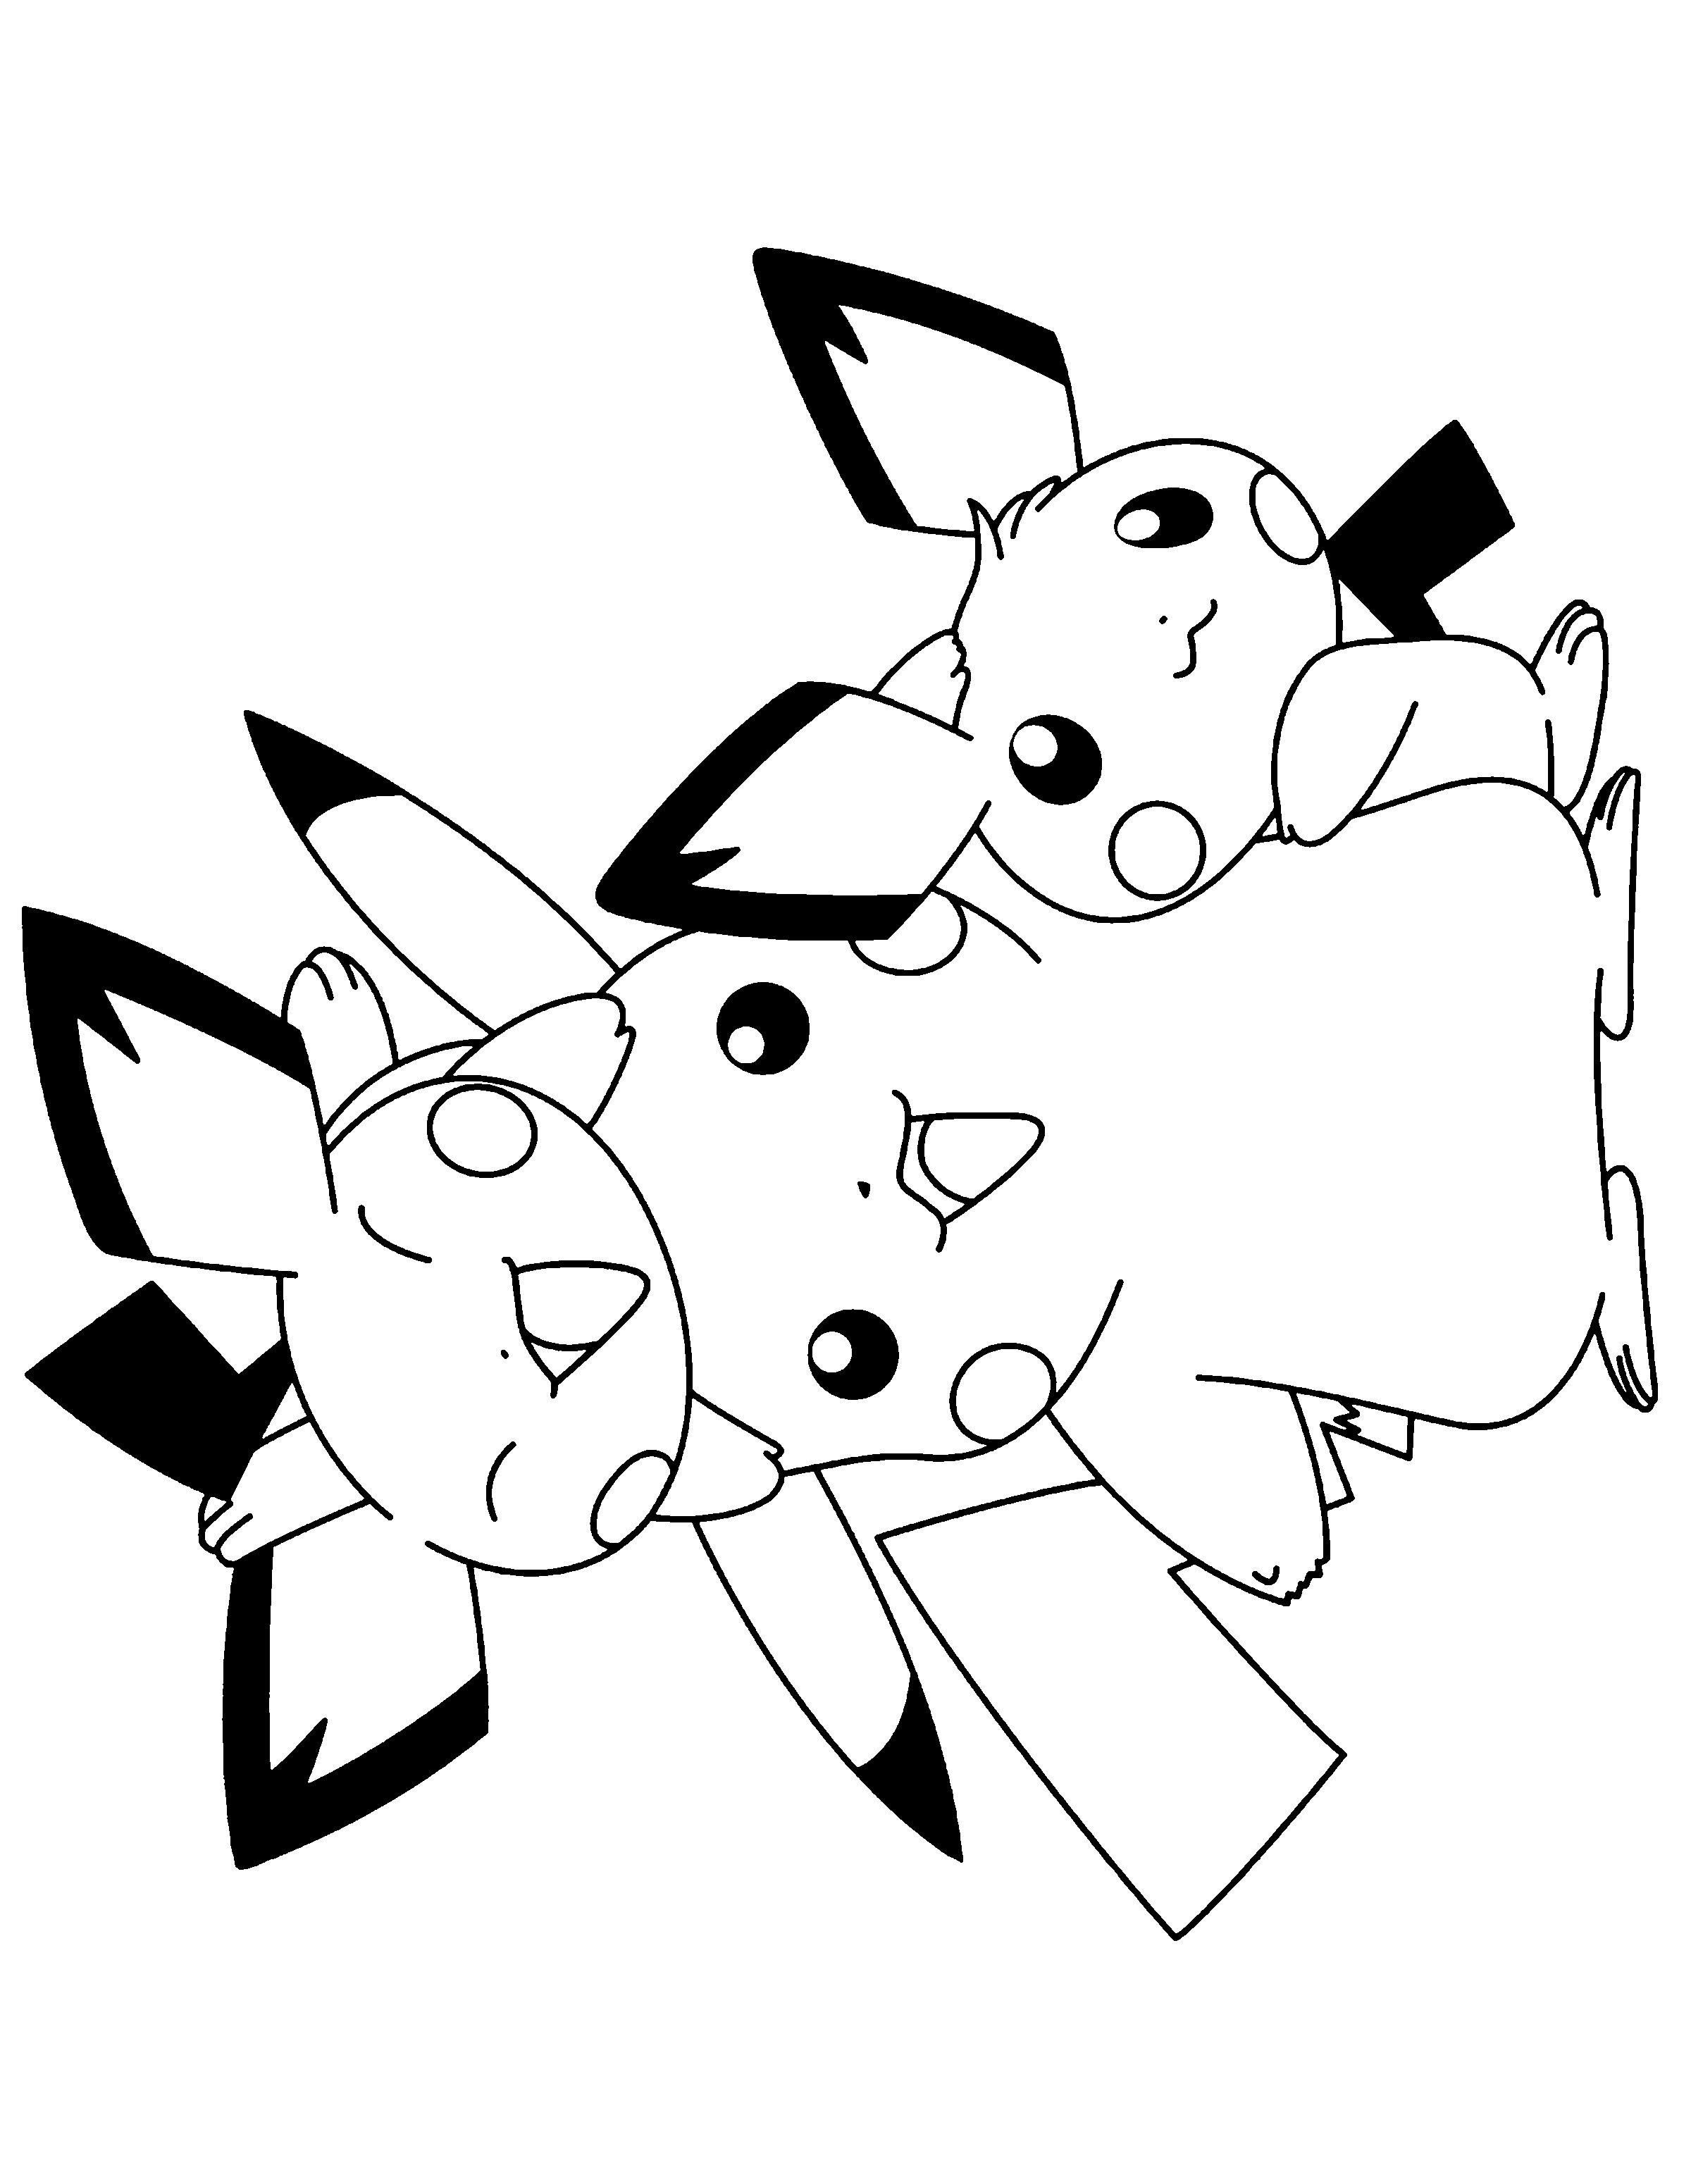 pokemon-pichu-coloring-pages-at-getcolorings-free-printable-colorings-pages-to-print-and-color